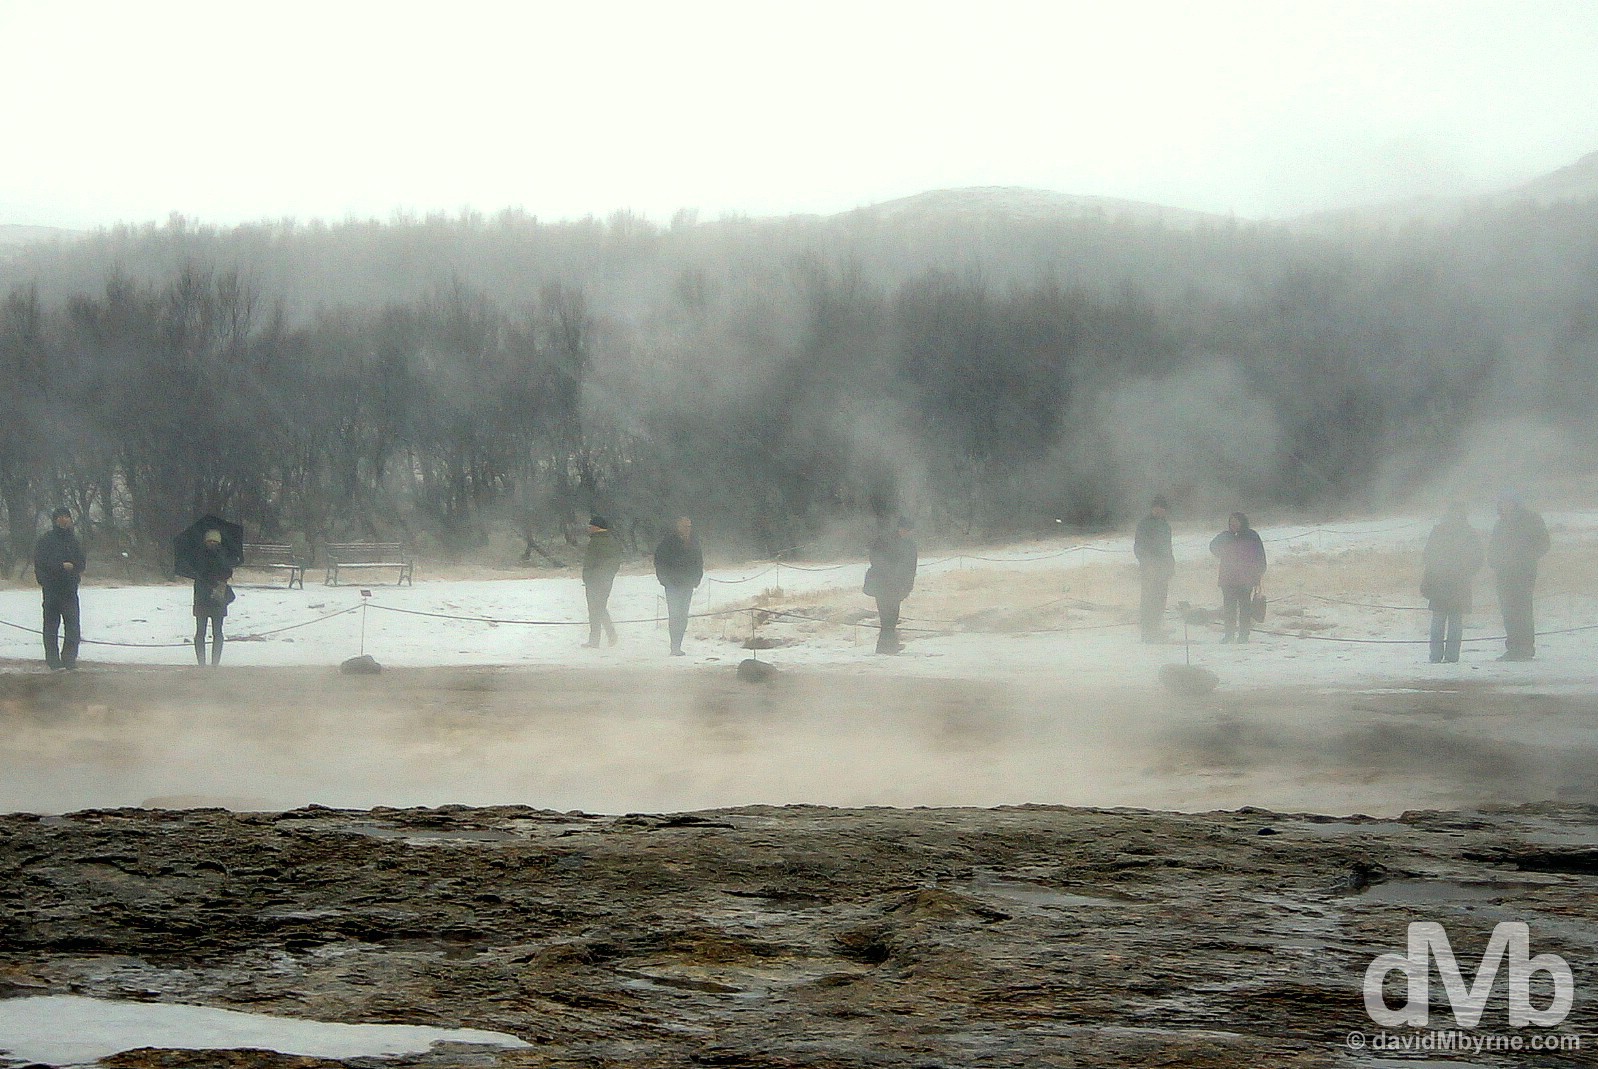 Standing by the Strokkur Geyser waiting for it to erupt (which it does so every 8-10 minutes) in the Haukadalur geothermal area, Iceland. December 3, 2012.